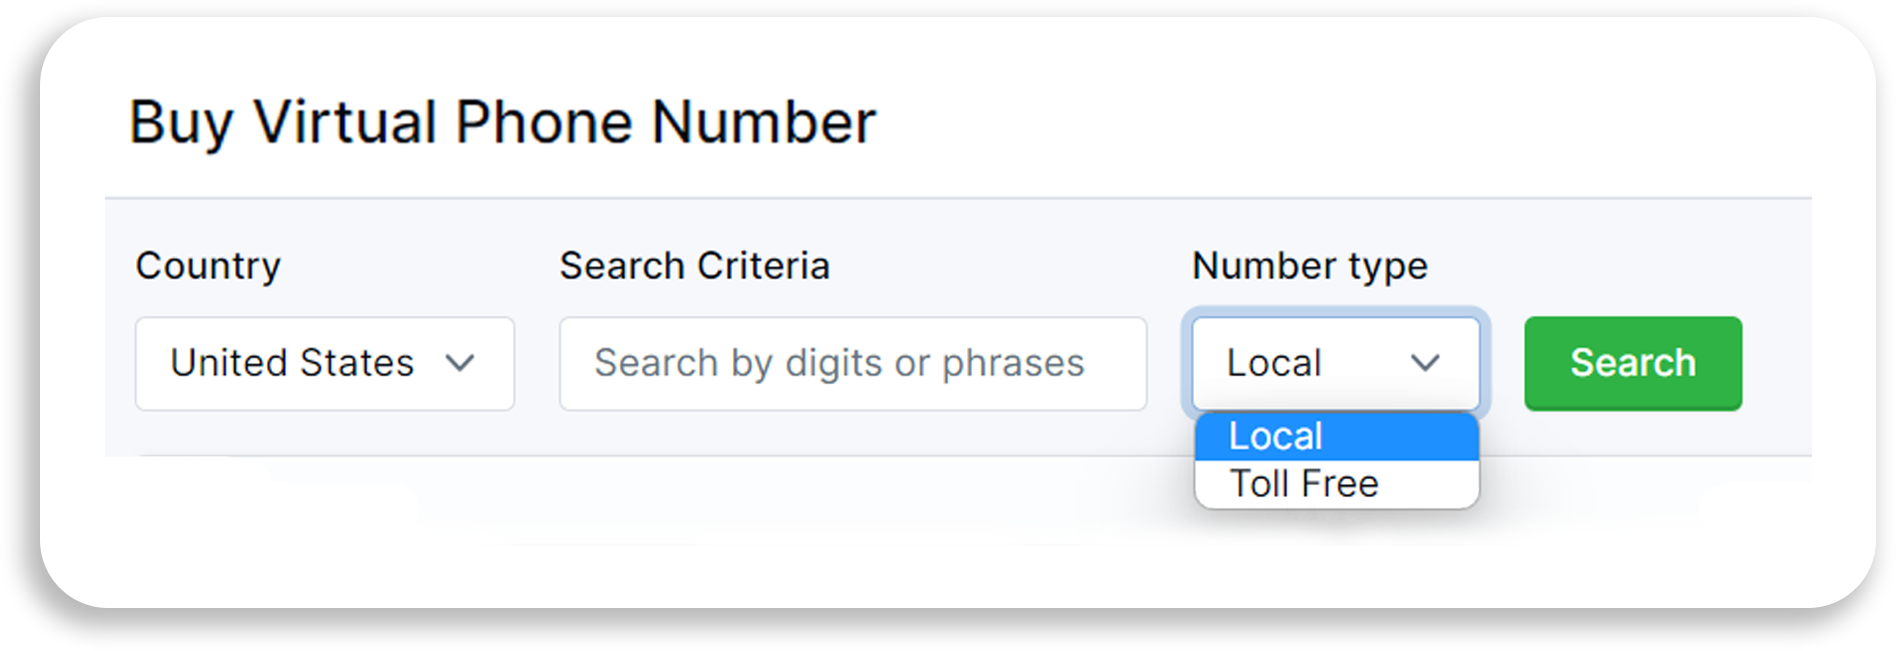 virtual number selection